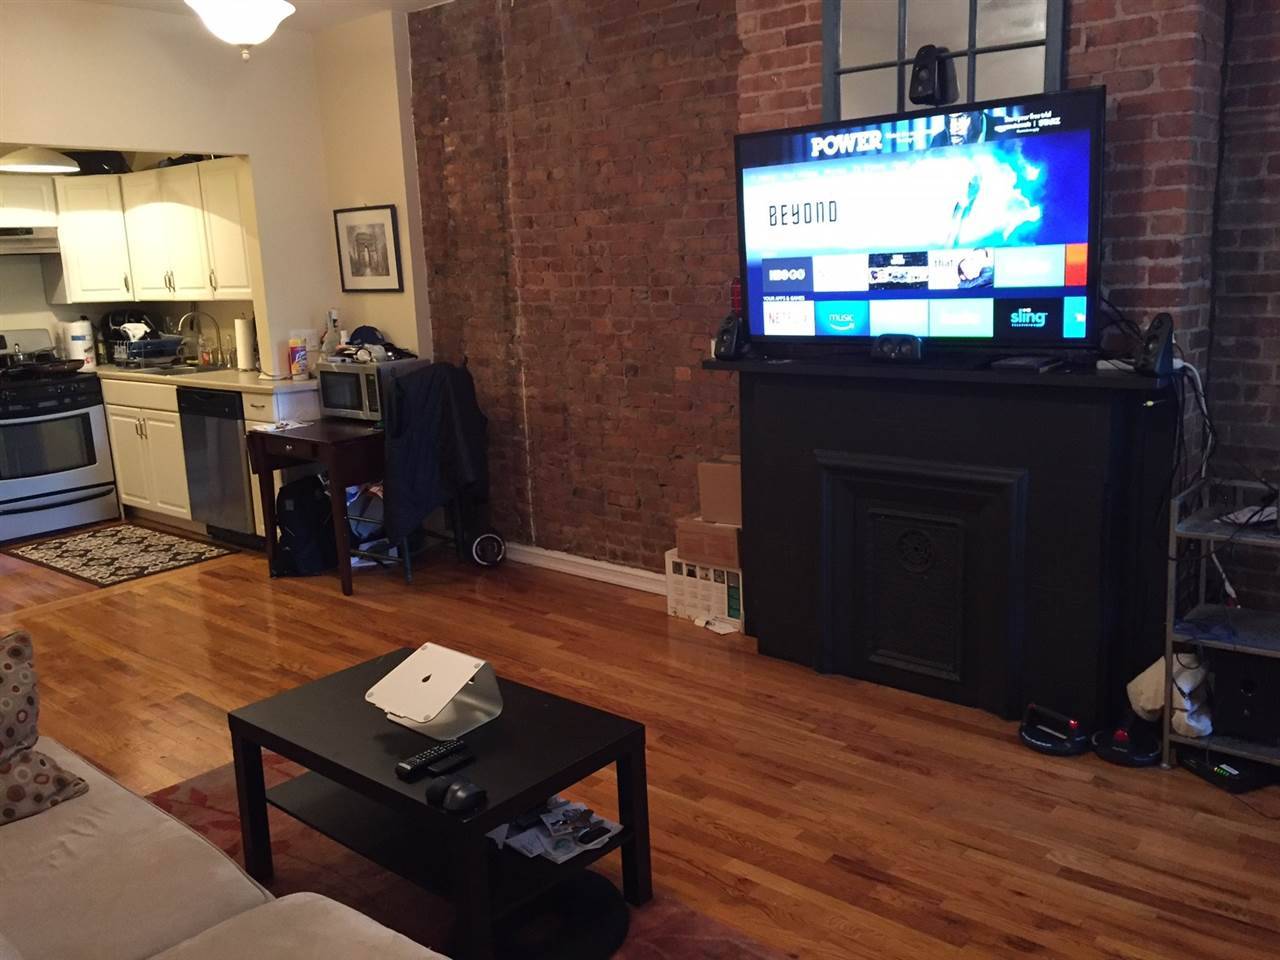 Hoboken's most sought after location & charming period details await you in this perfect 2 bed/1 bath